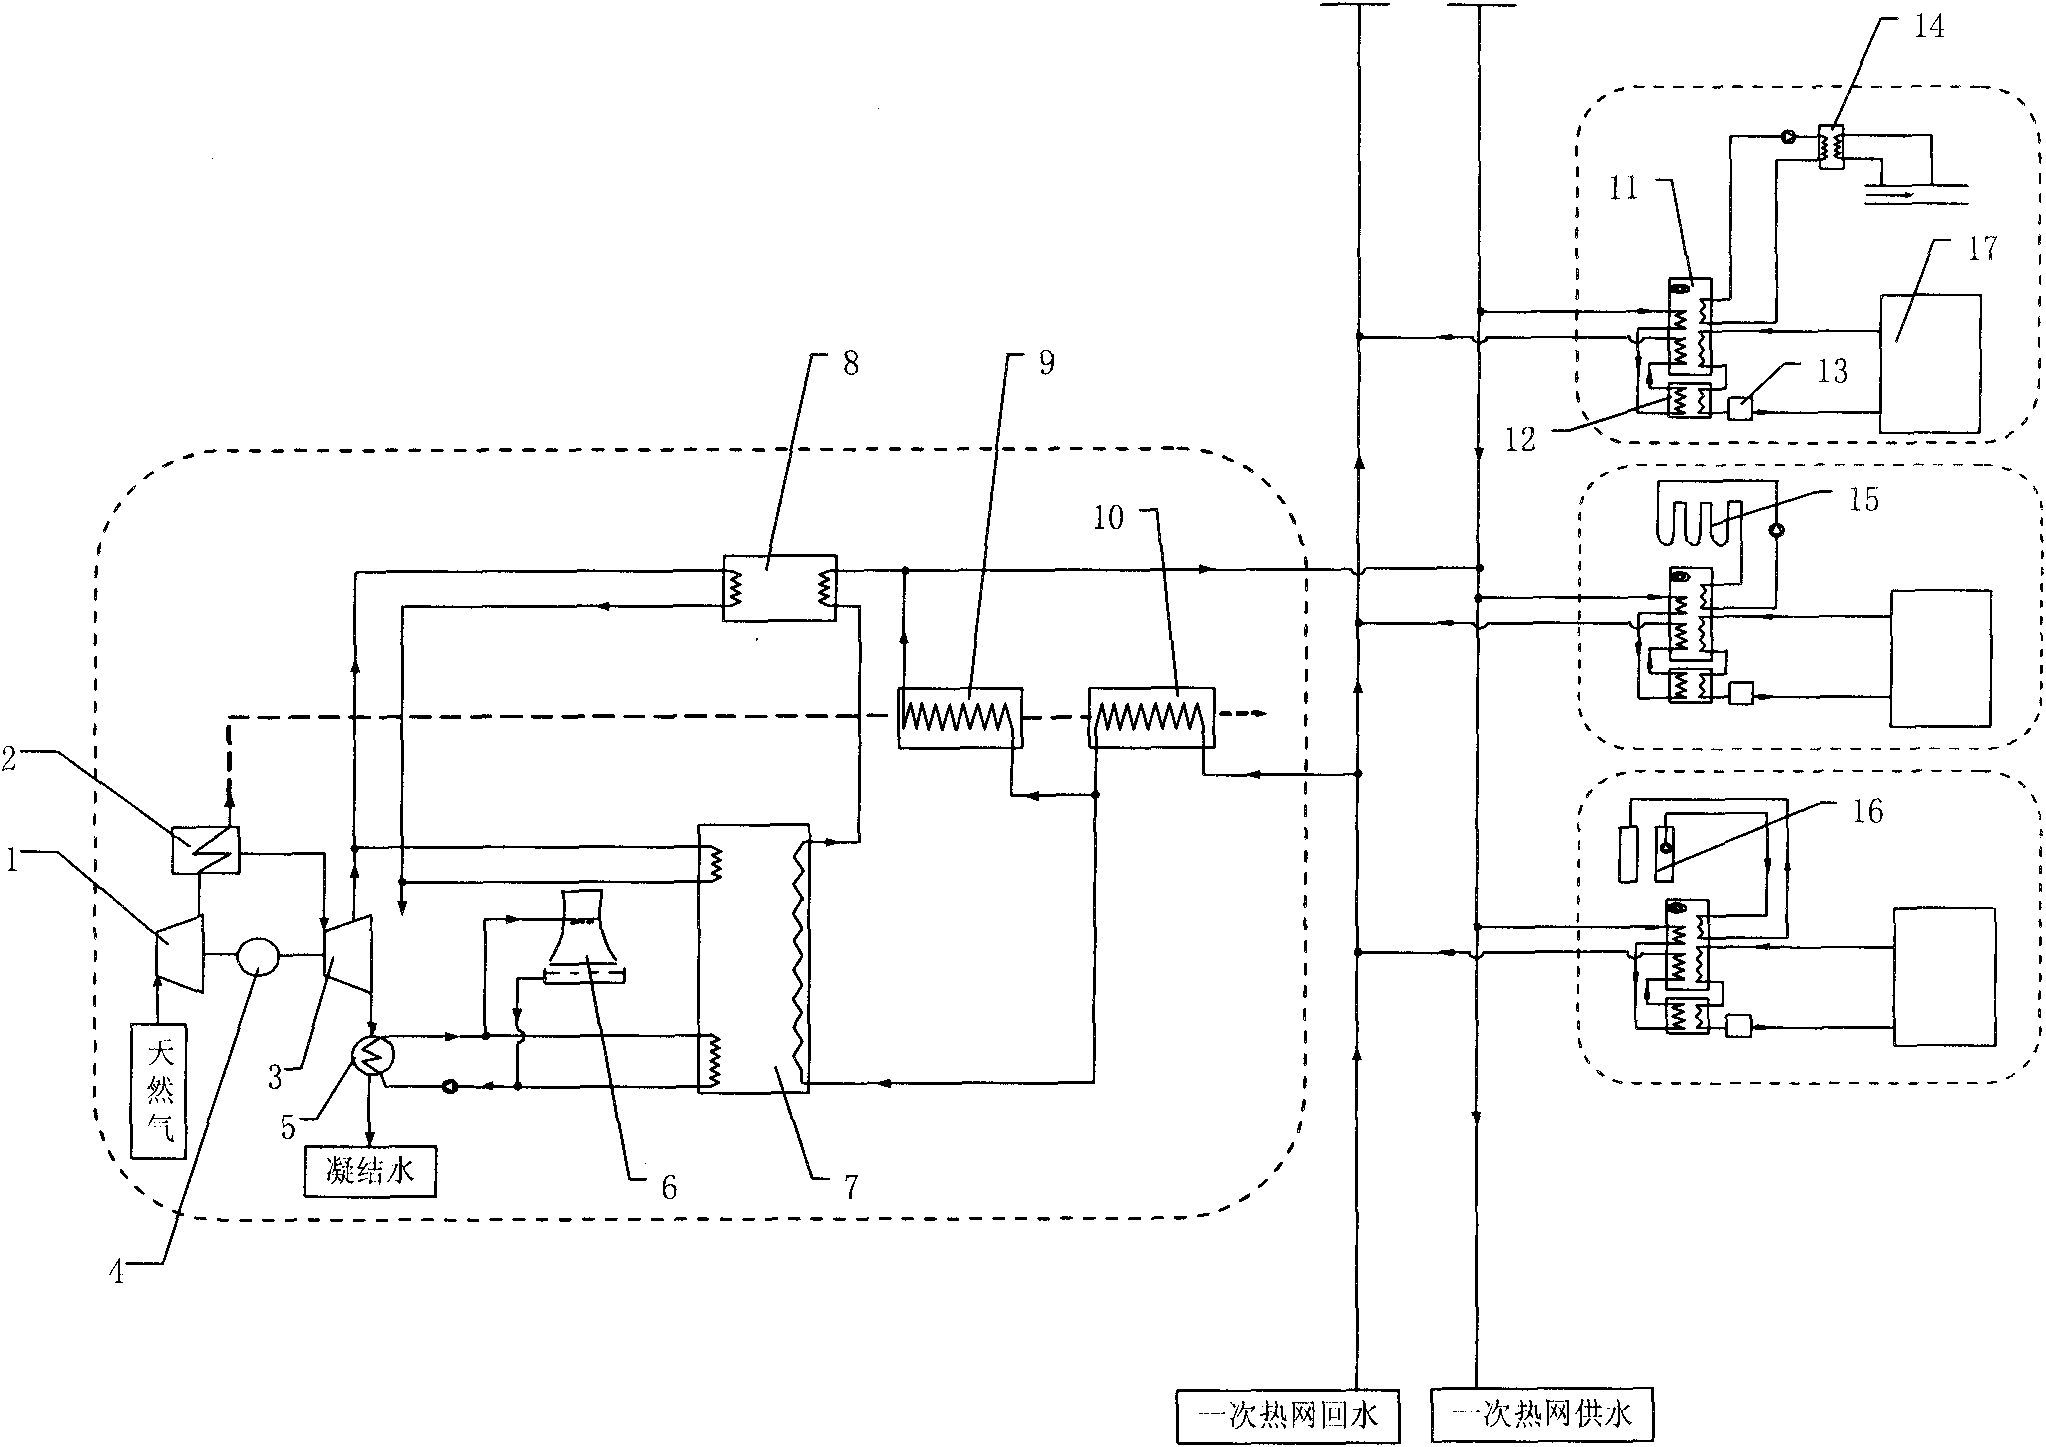 Energy supply system mainly through gas and steam combined cycle cogeneration